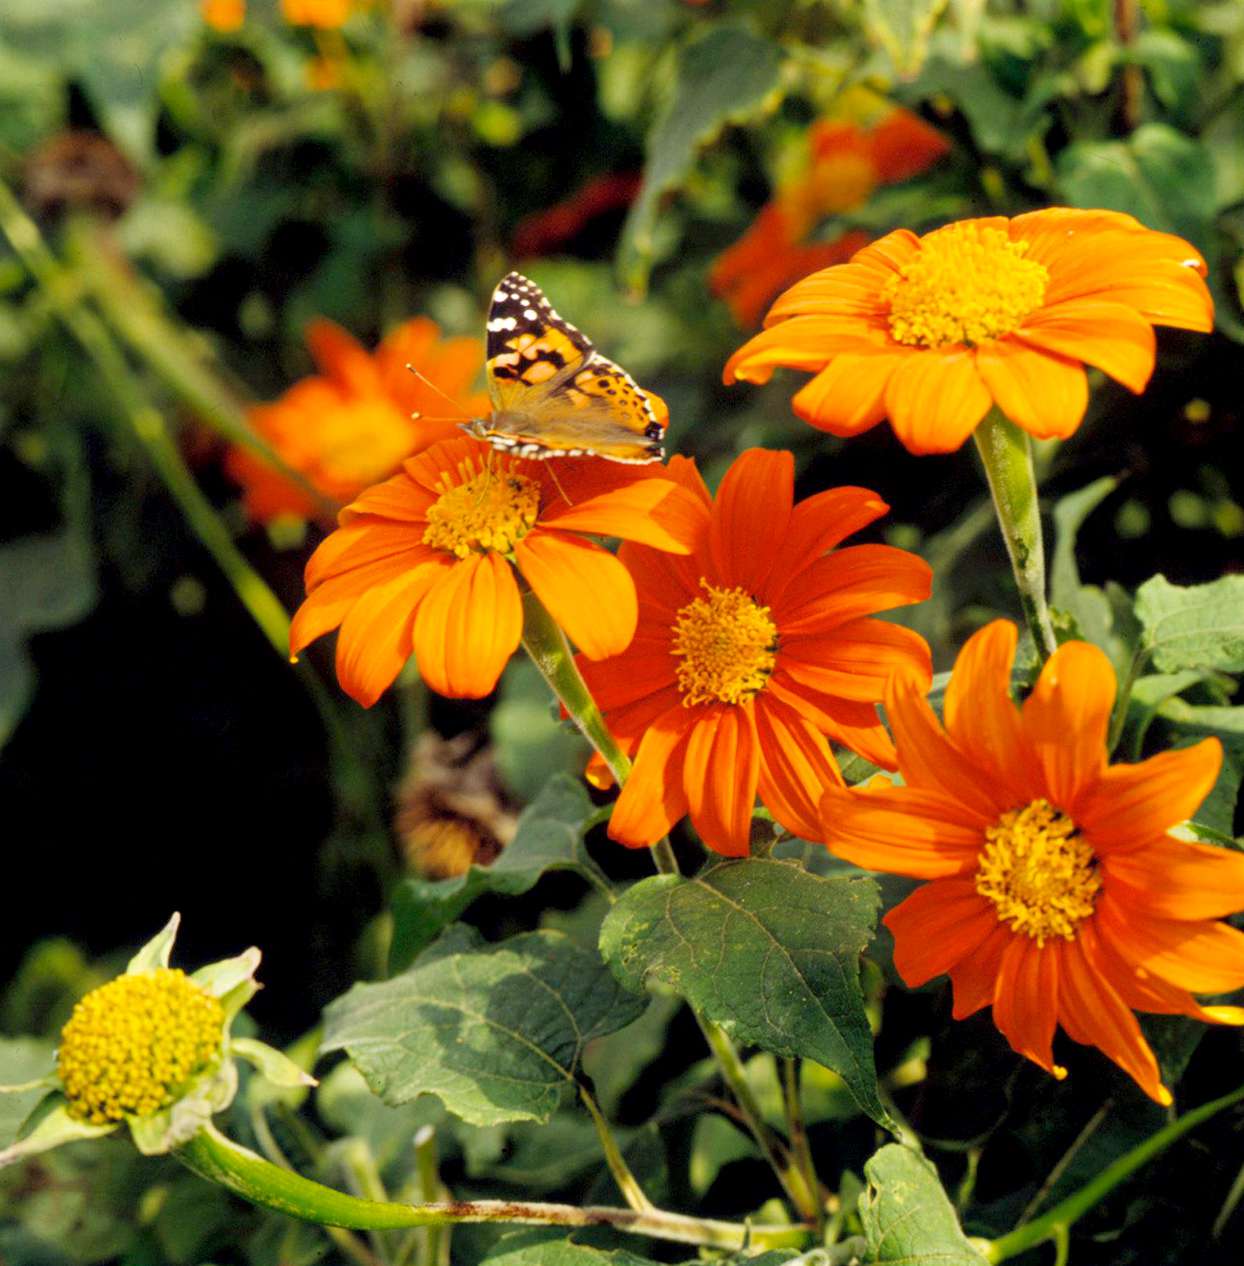 Butterfly on Mexican sunflower